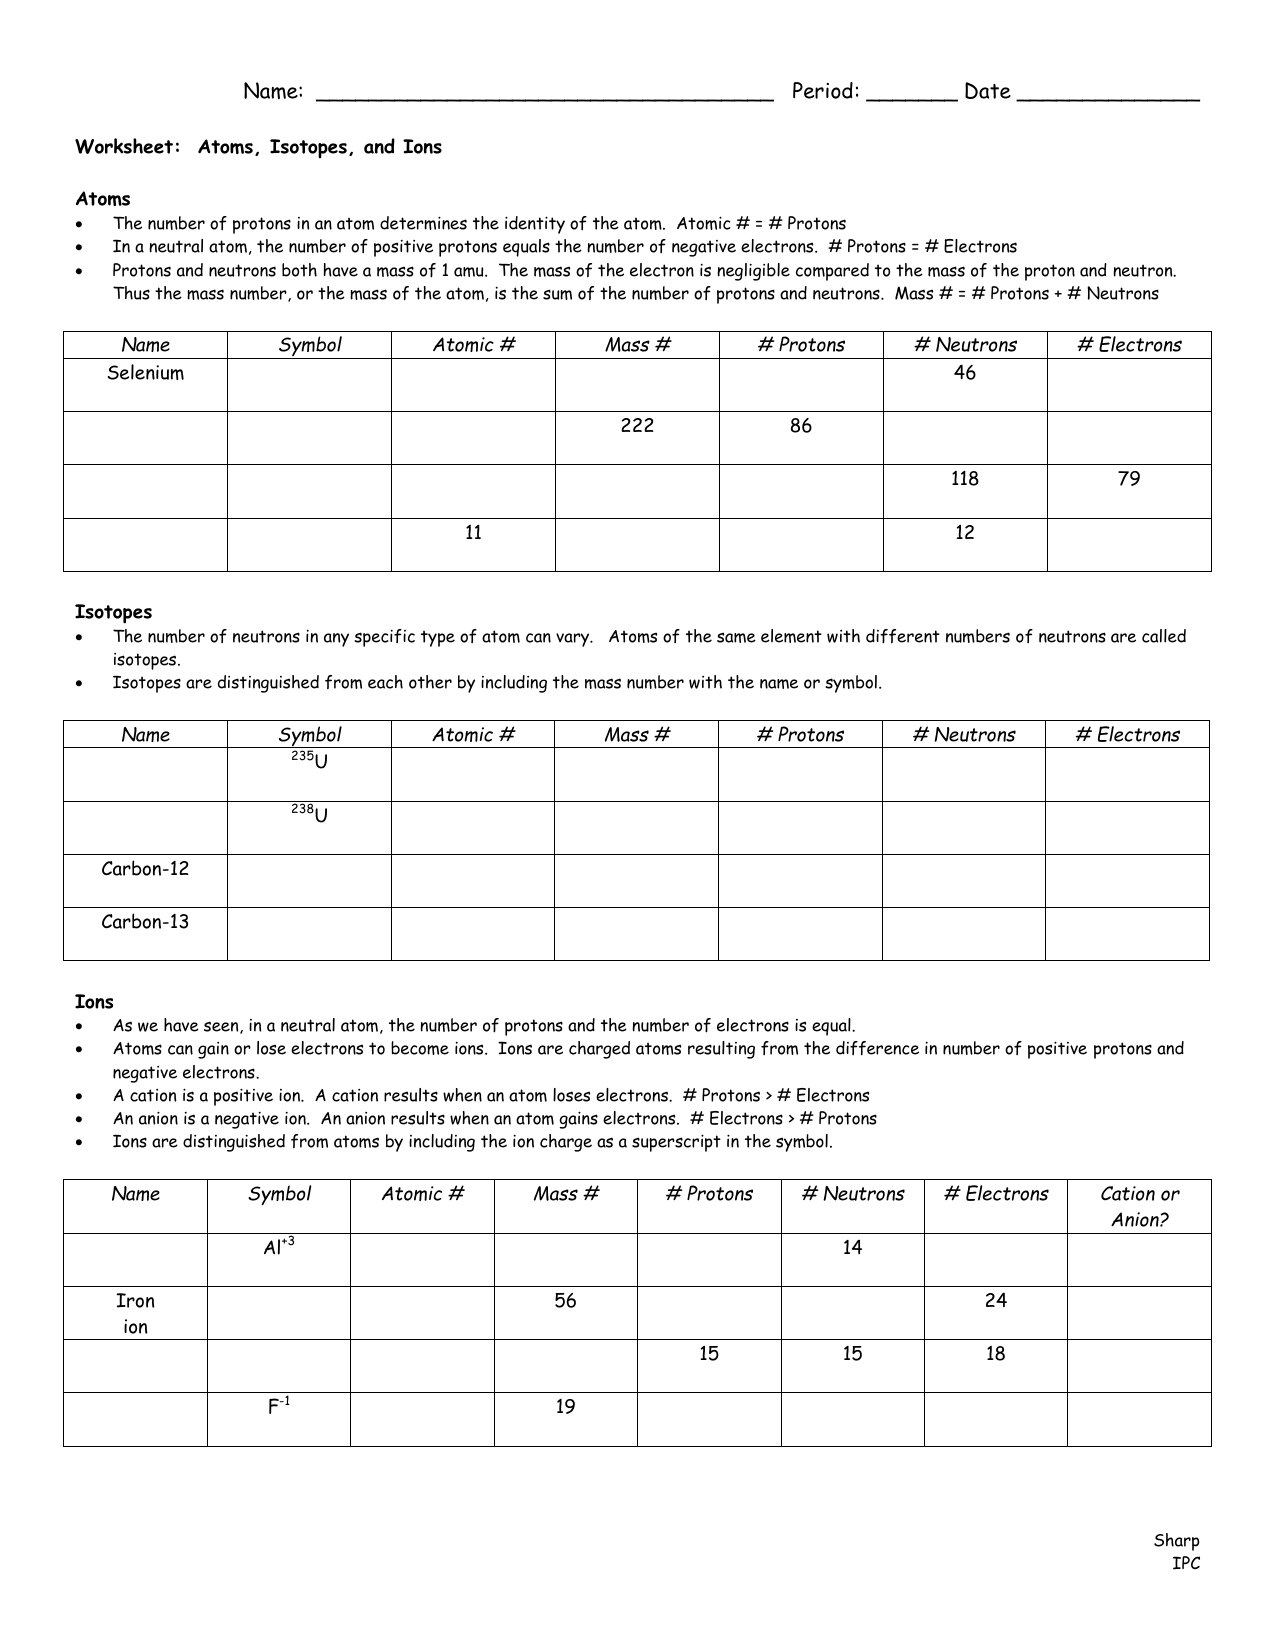 Atoms, Isotopes, & Ions Worksheet Throughout Atoms Vs Ions Worksheet Answers